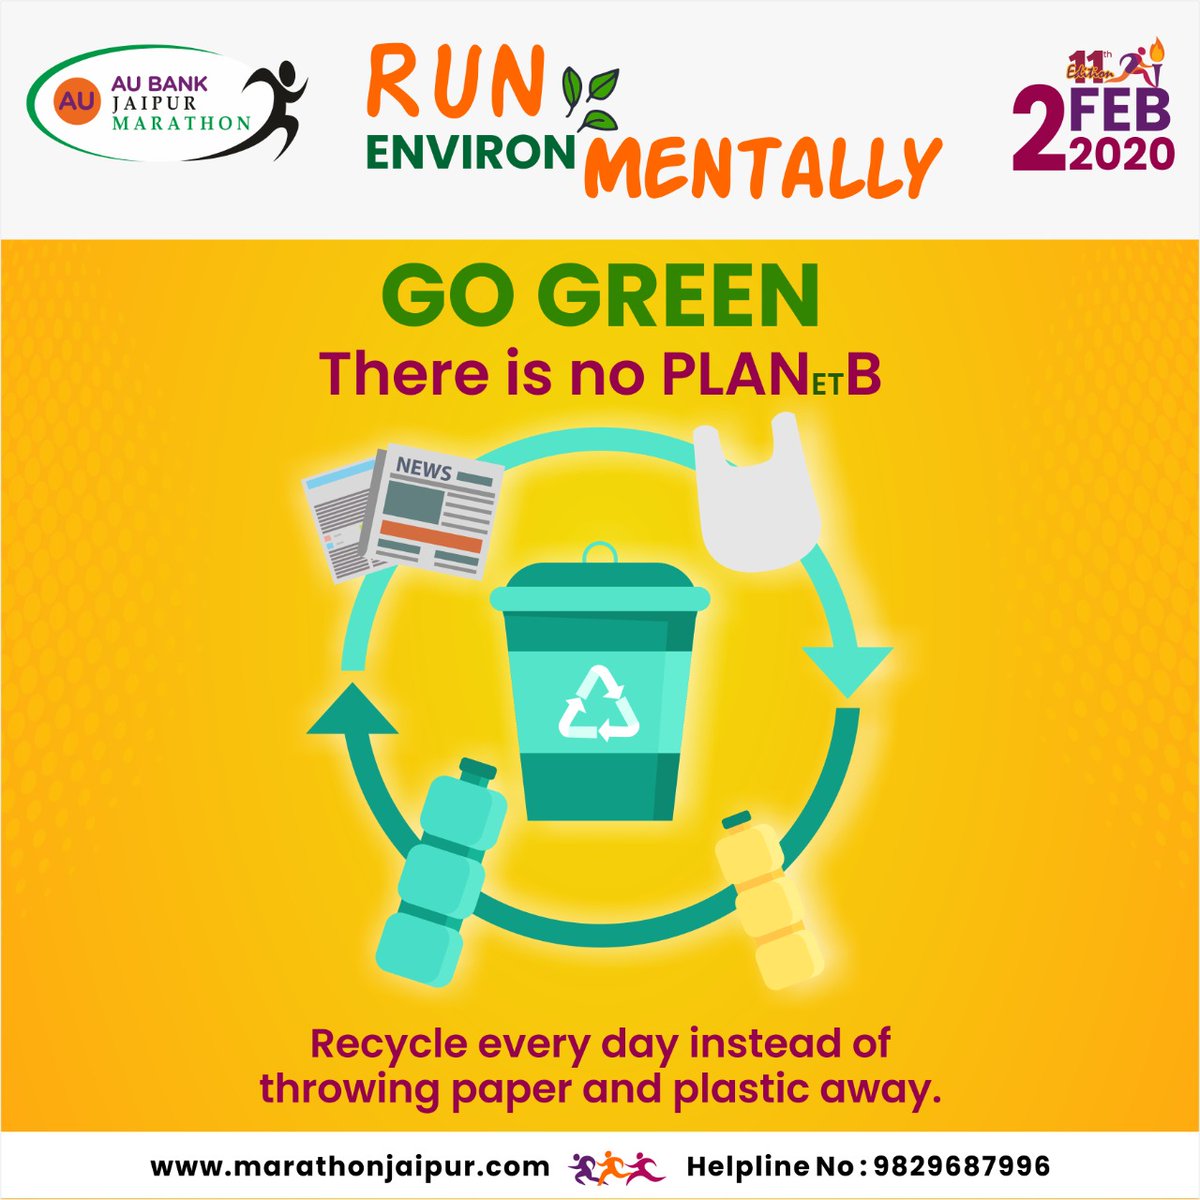 🏃‍♀️Attention Runners 🏃‍♂️There Is No PLANet B🌿Recycle Every Day Instead Of Throwing Paper & Plastic Away🌿 Let's be a part of Go Green Initiative By AU Bank Jaipur Marathon🥳 #AUBJM #JaipurMarathon #ReasonToCelebrate #Jaipur #GoGreen #CleanGreen #Environment #Runners #CleanJaipur